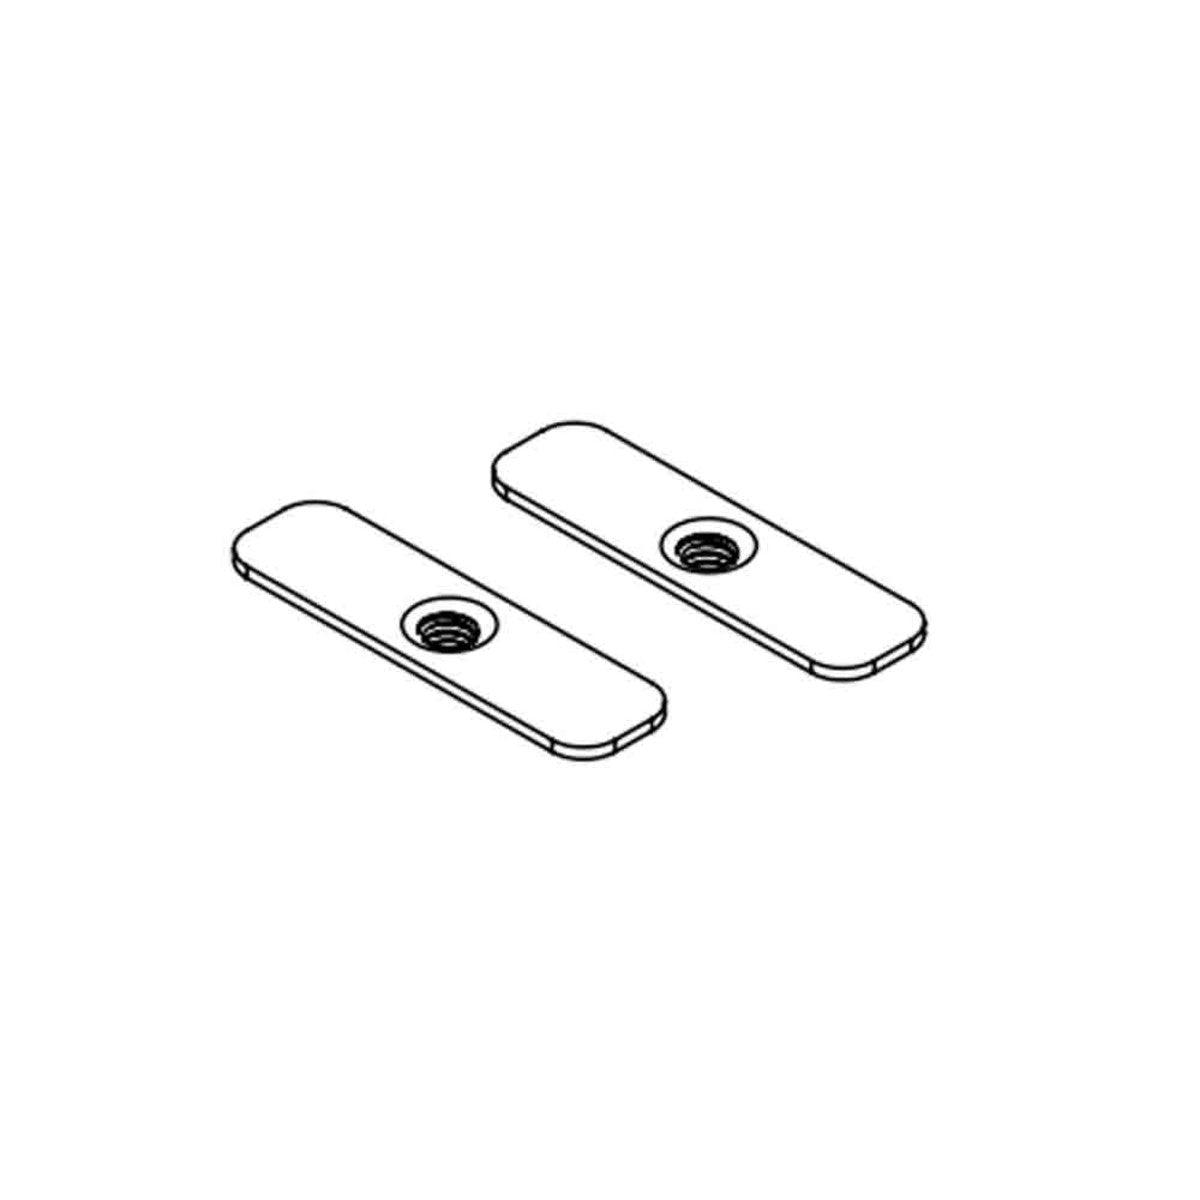 Chromapath Vertical Mounting Brackets, Pack of 2